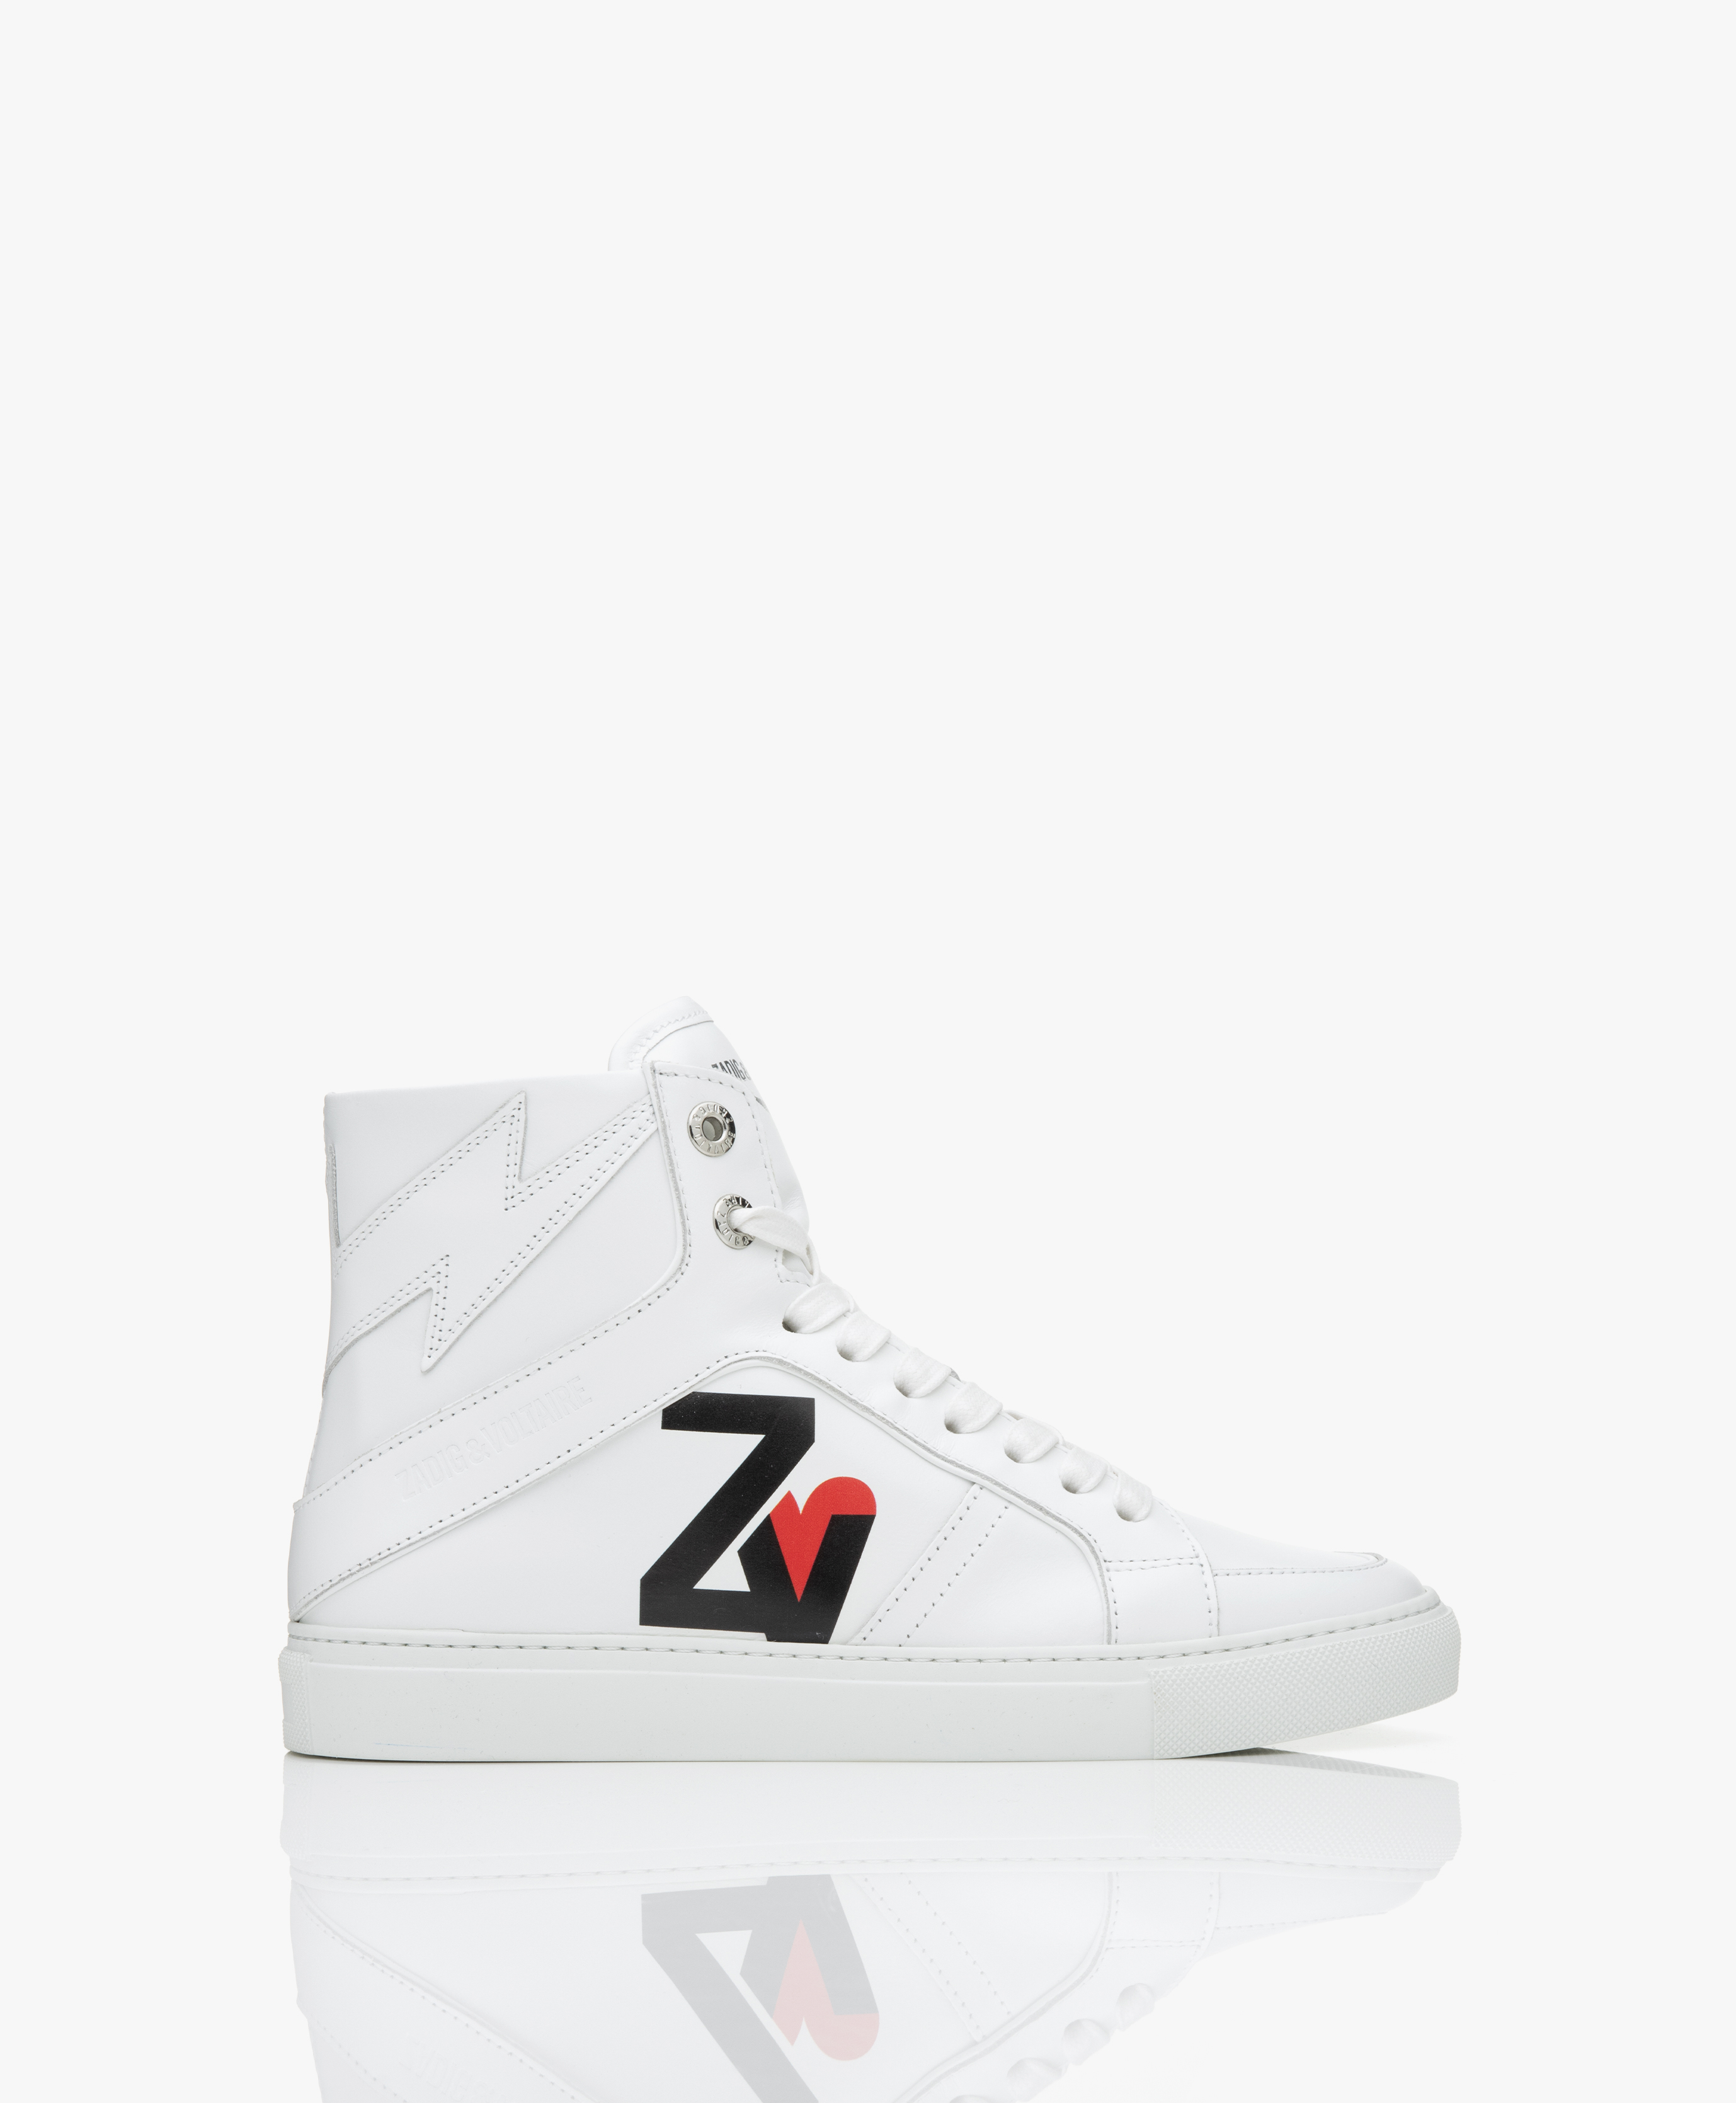 & Voltaire ZV1747 Leather Logo Sneakers - White - zv1747 swsn00028